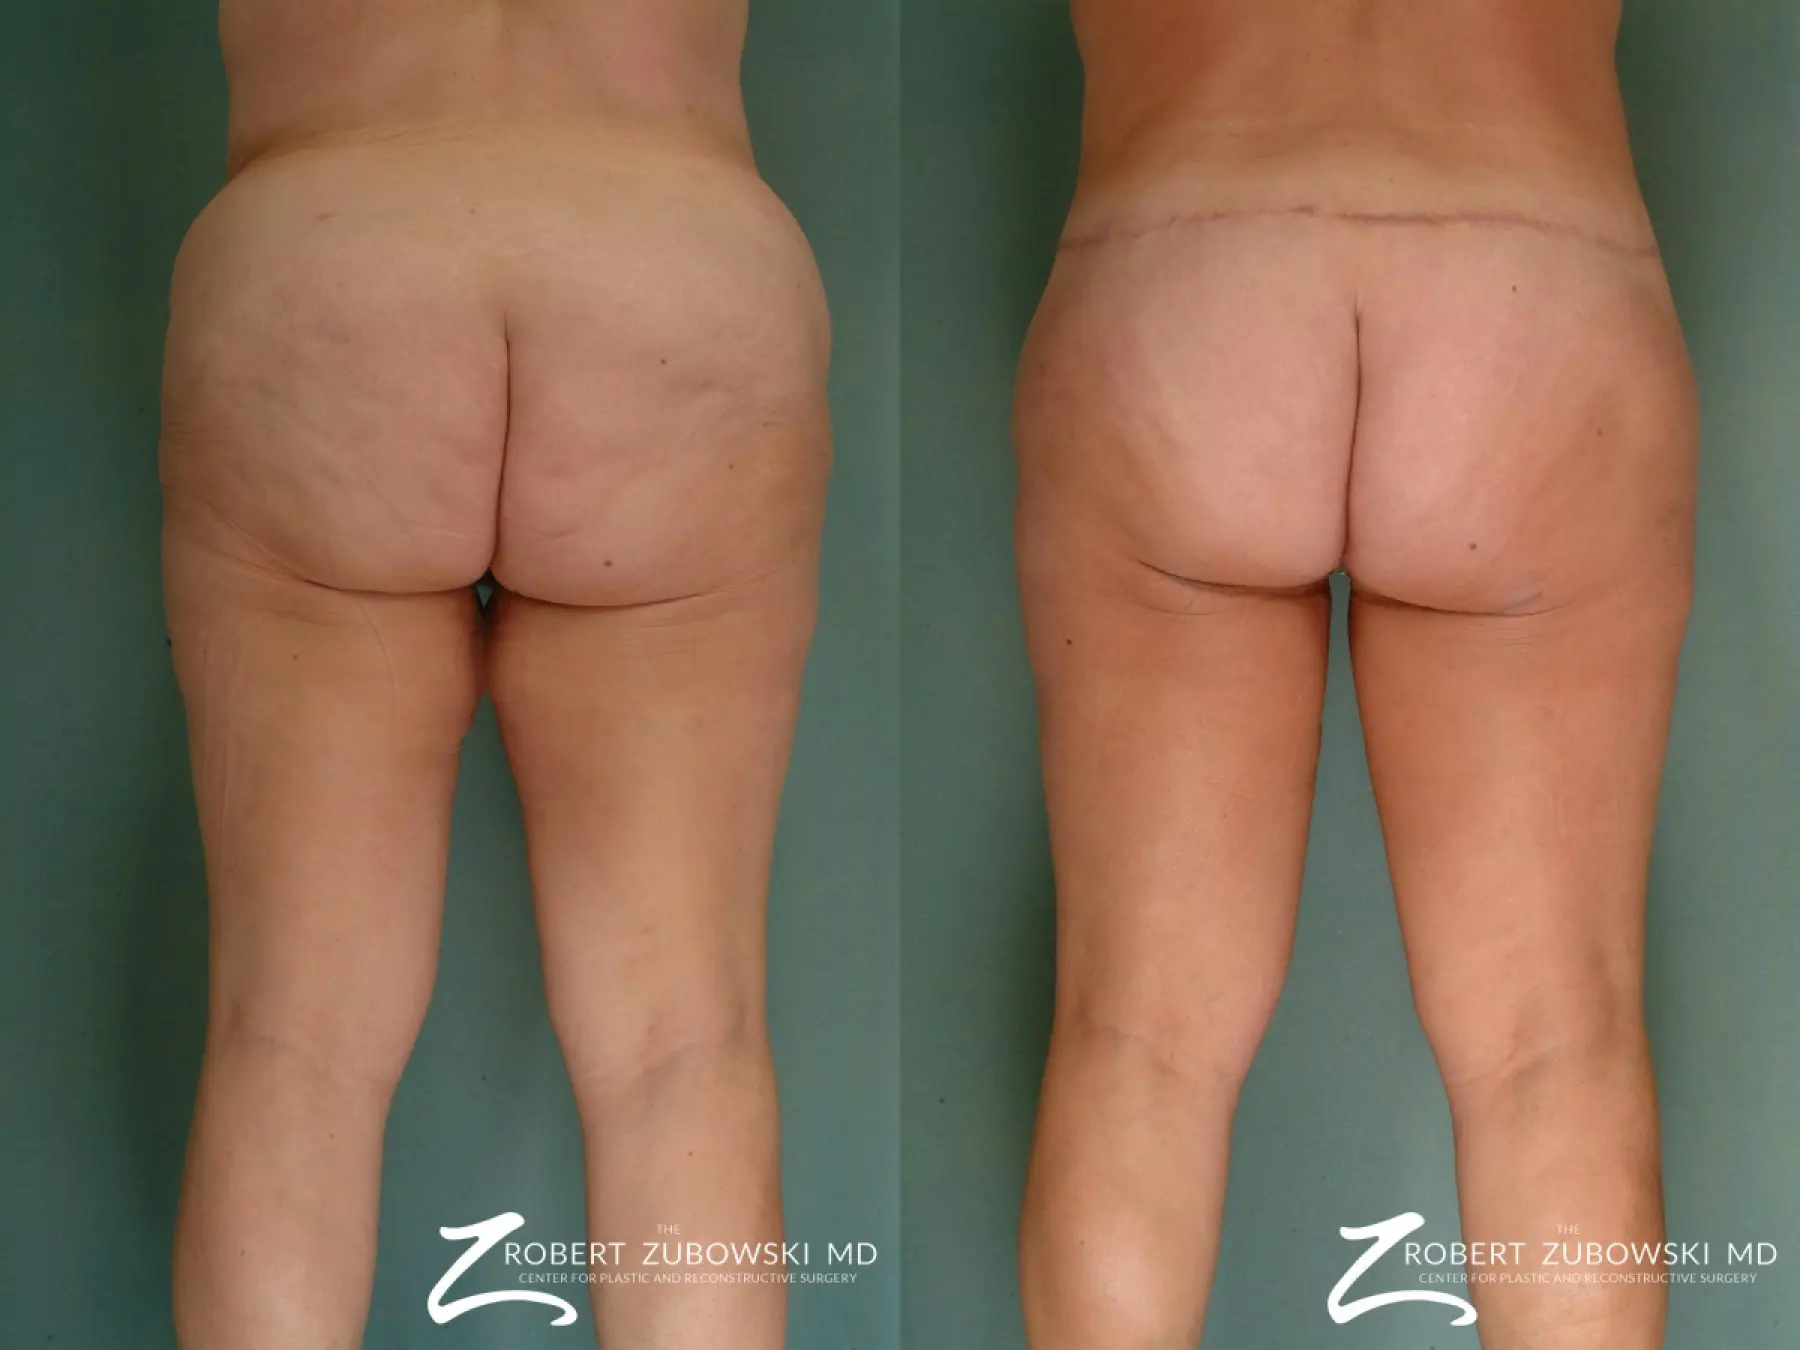 Body Lift: Patient 5 - Before and After 2